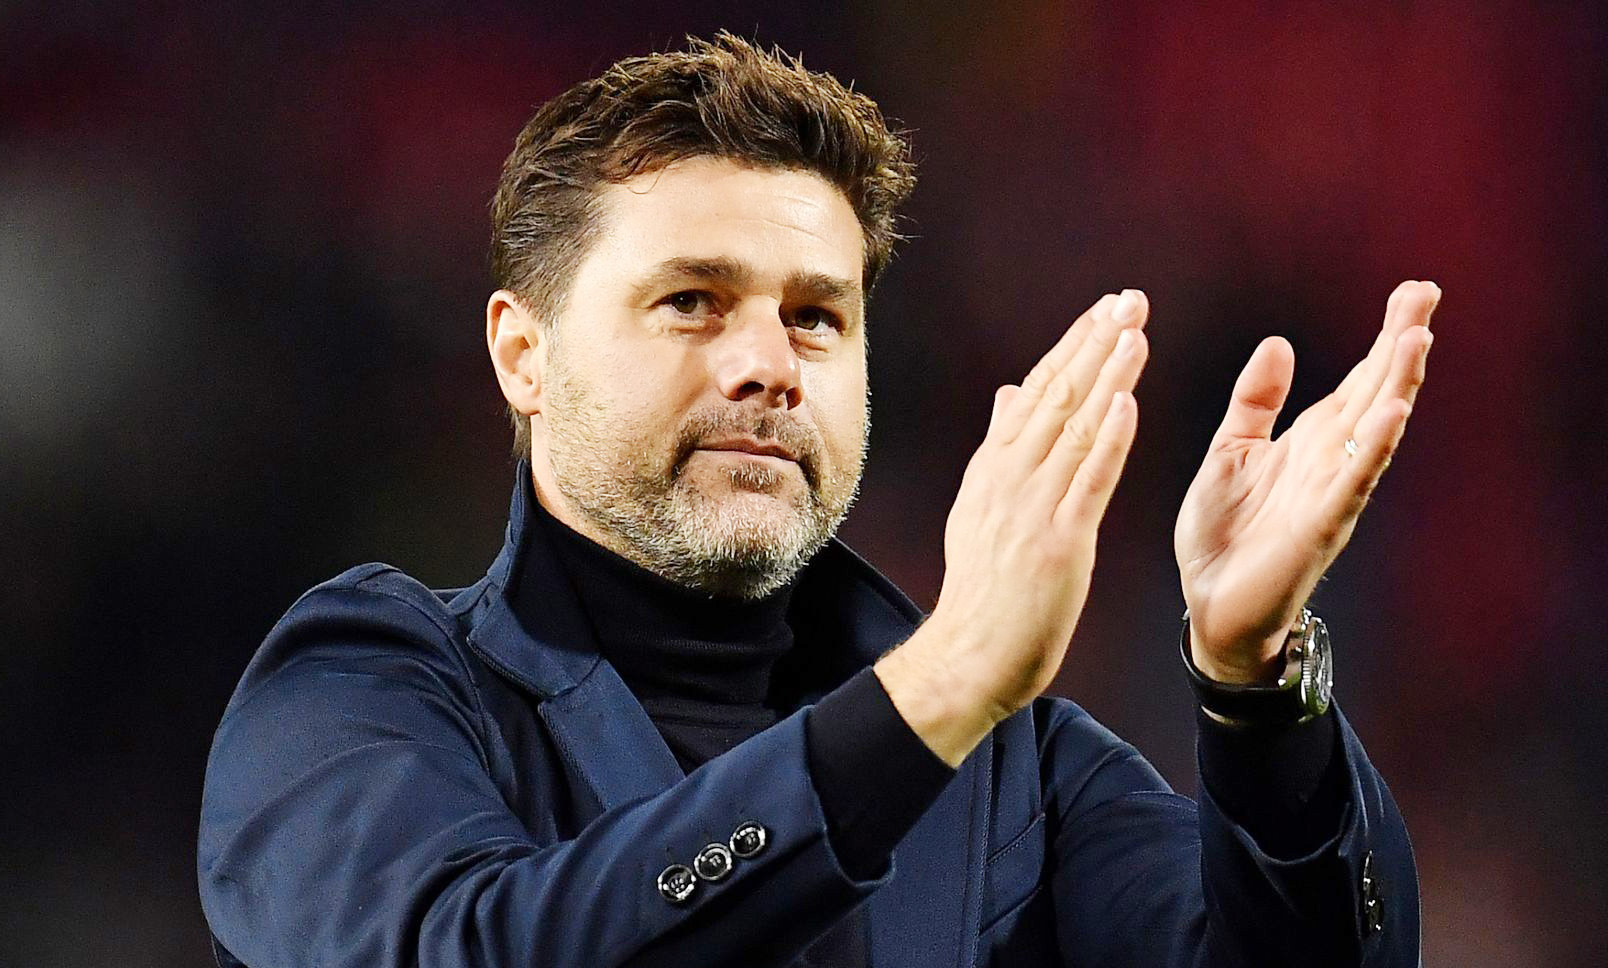 What really marked the end for Pochettino at Chelsea